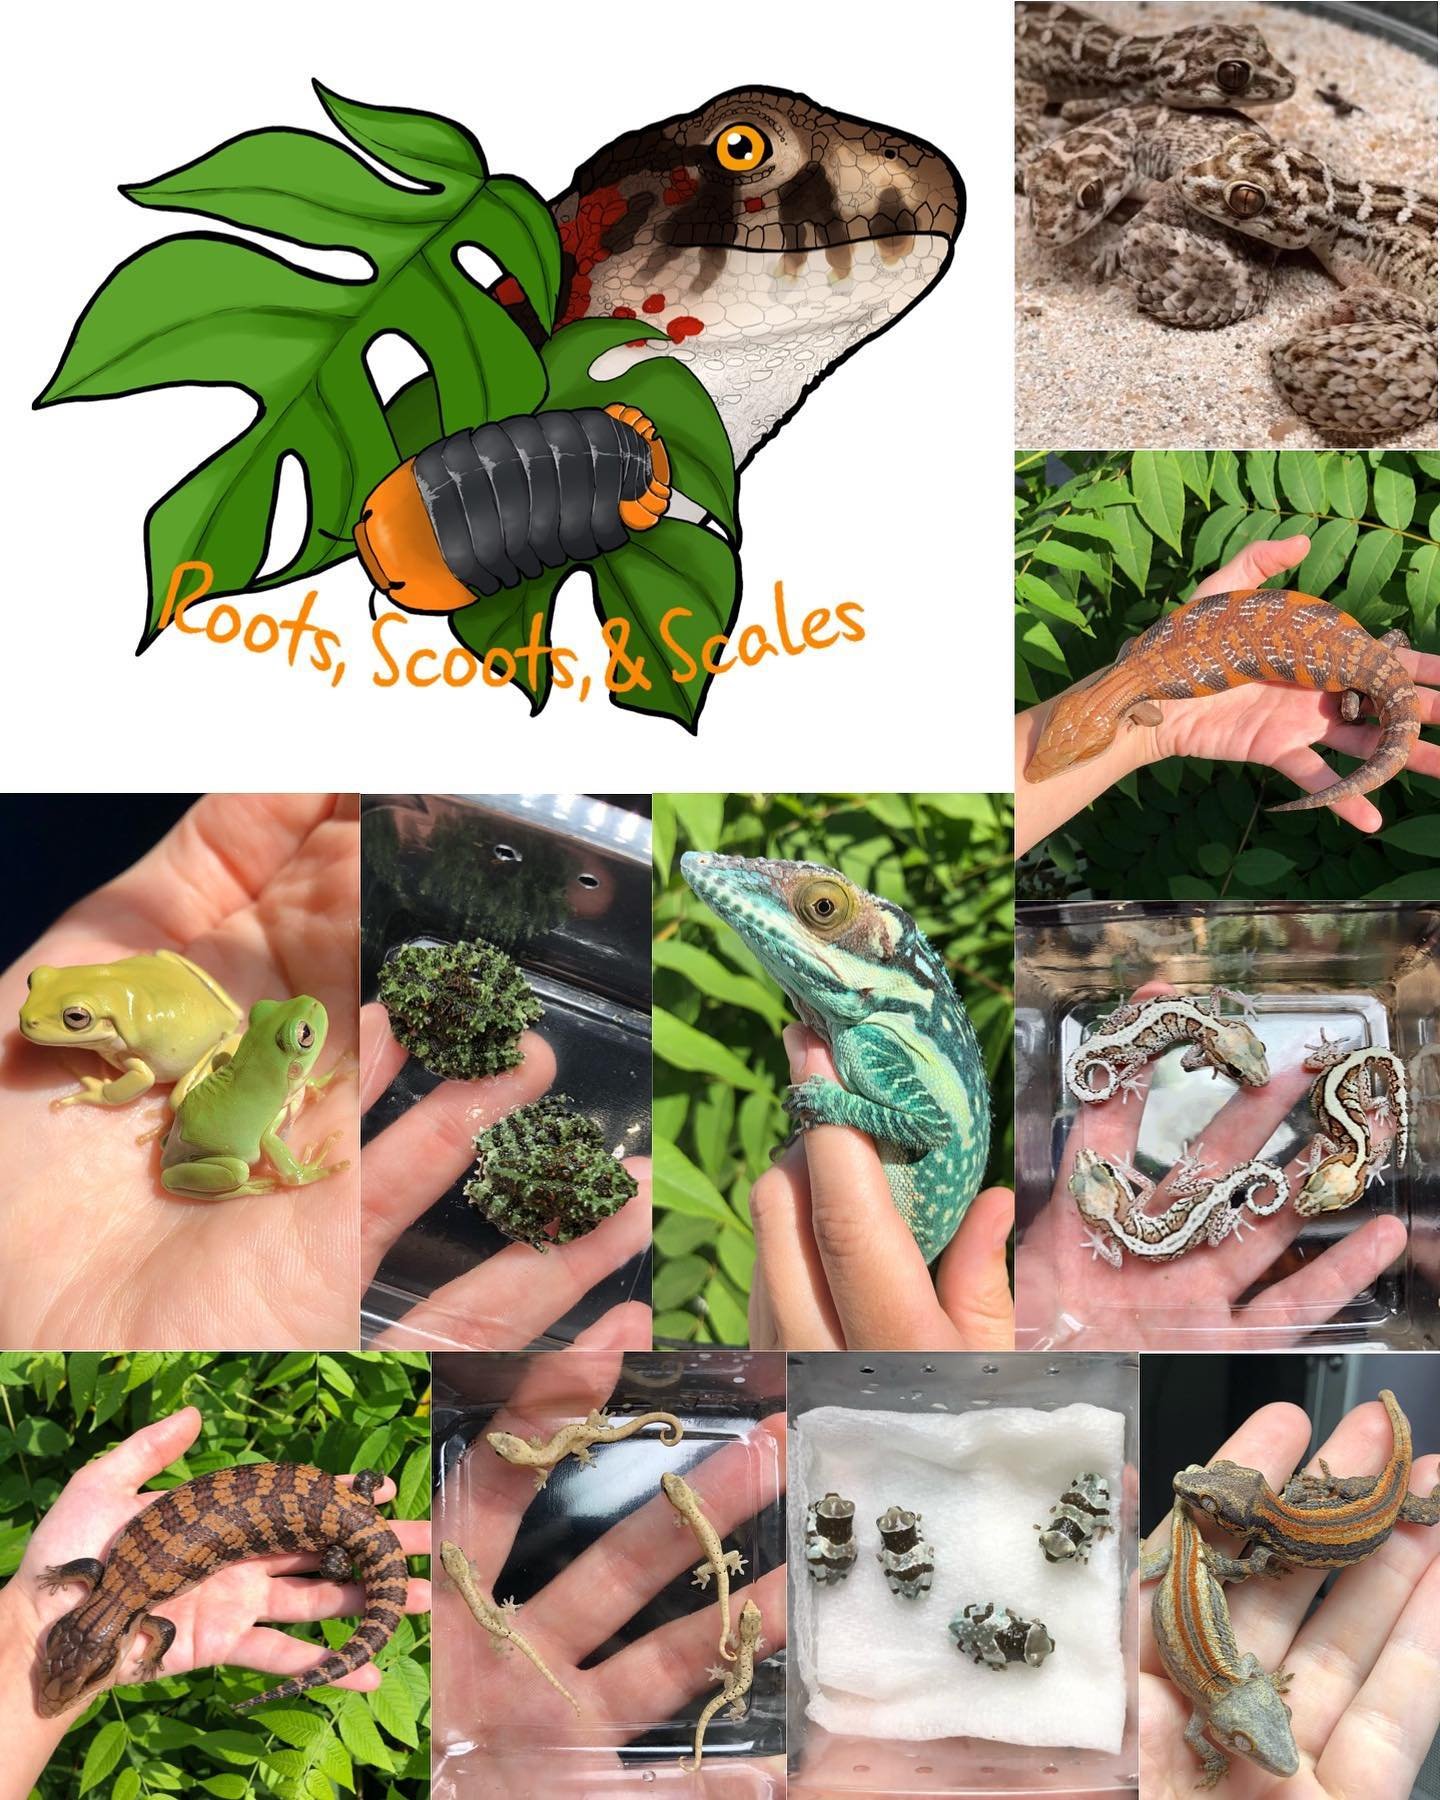 @roots_scoots_scales will be joining us June 2nd! 

They will have a neat variety of exotic reptiles. Just a few exciting things they&rsquo;ll be bringing are 

-Northern Blue Tongue Skinks
-Irian Jaya Blue Tongue Skinks
-Smallwood&rsquo;s anoles
-Gr